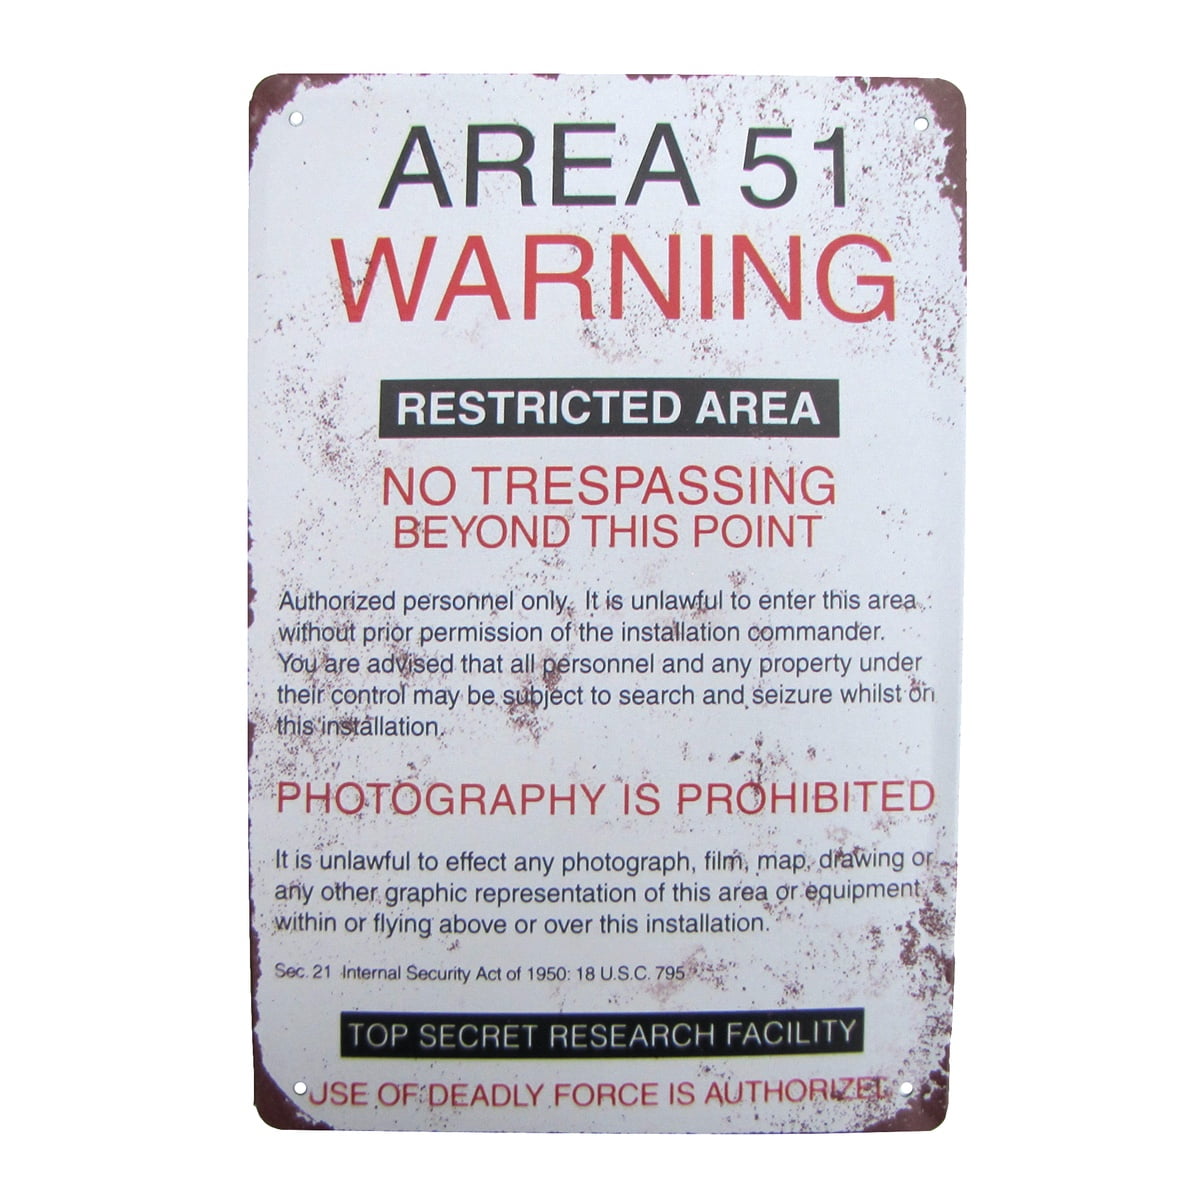 Warning Restricted Area Metal Tin Signs Poster Pub Bar Art Wall Hanging 